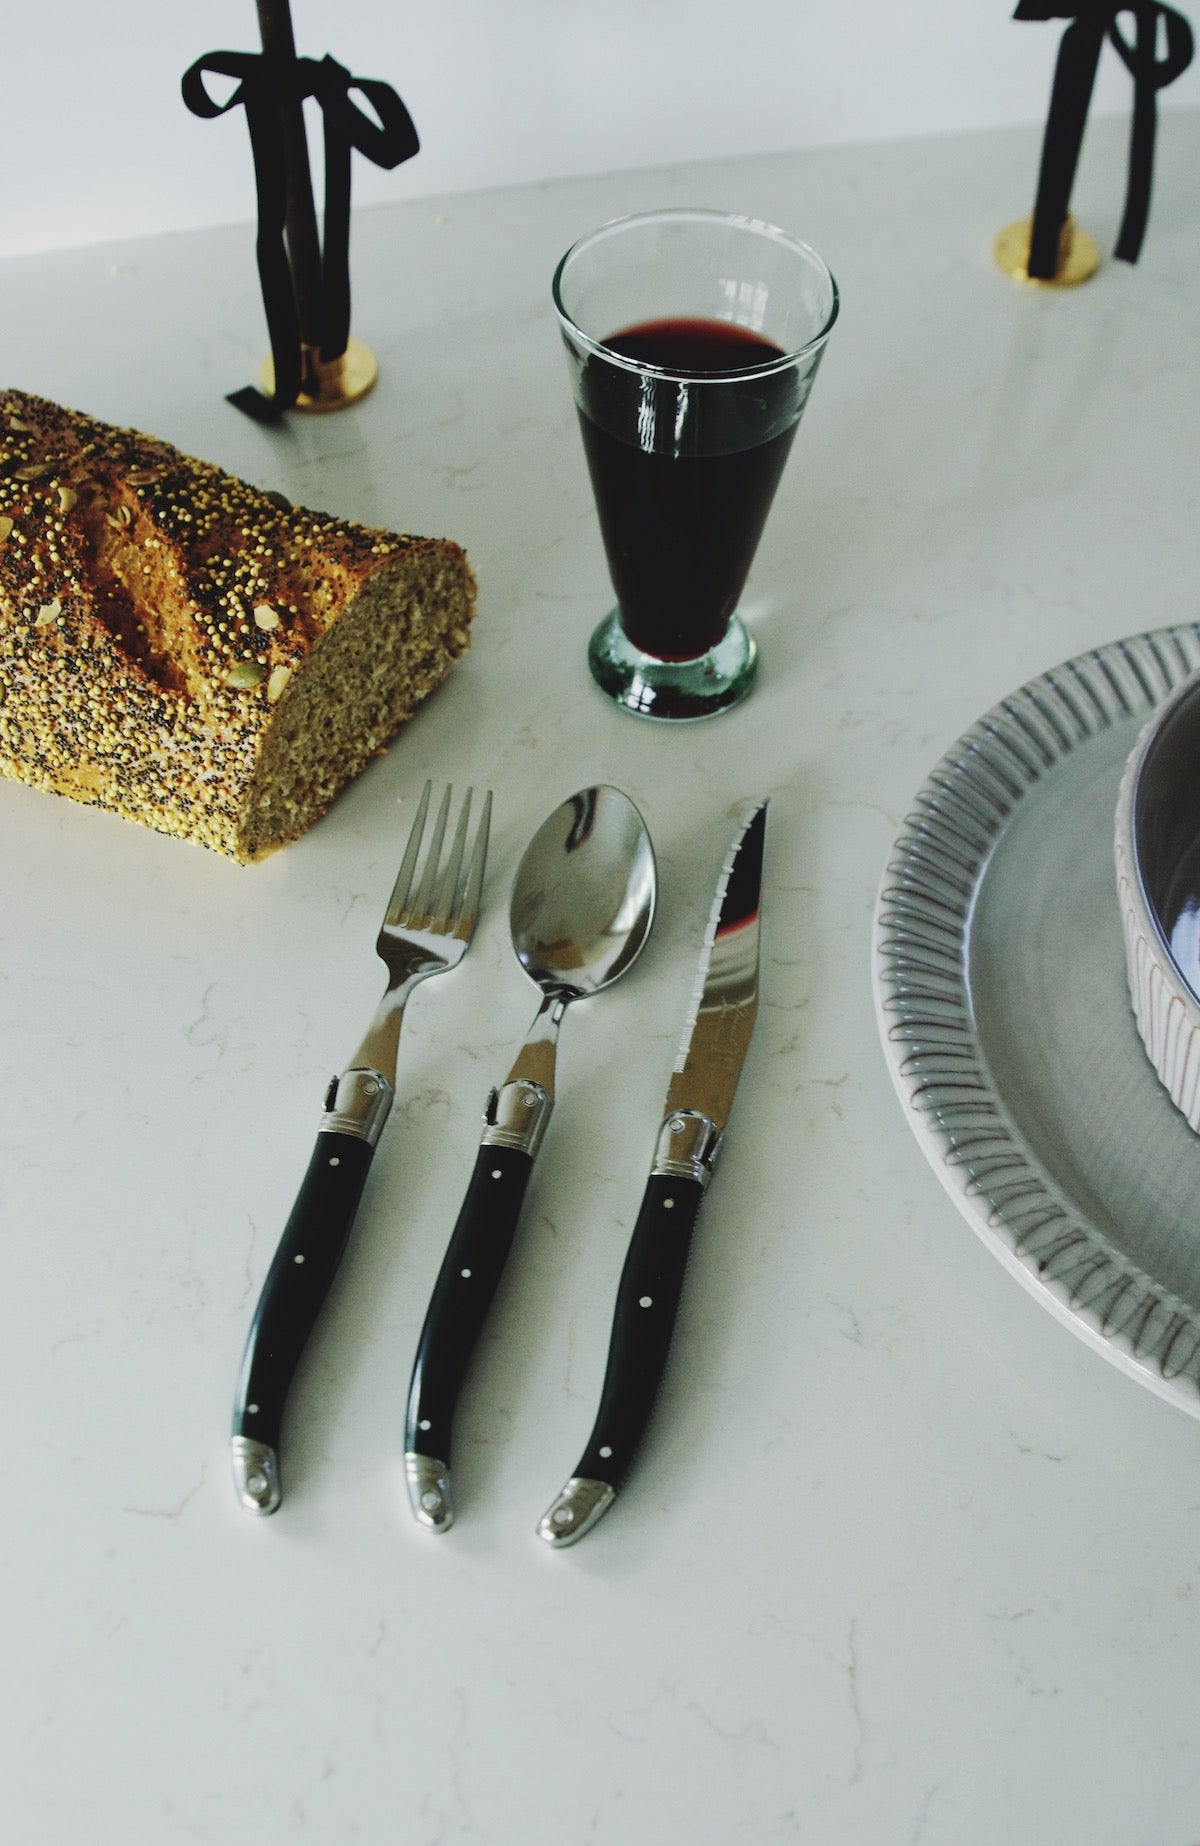 An elegant table setting featuring a selection of French Laguiole cutlery with black handles, including two knives, a fork, and a spoon, arranged to the left of a gray ceramic plate with ribbed edges. A slice of multi-seed bread, a glass of red wine, and a candle with a black bow tied around its holder complete the sophisticated dining atmosphere, all resting on a marble surface."